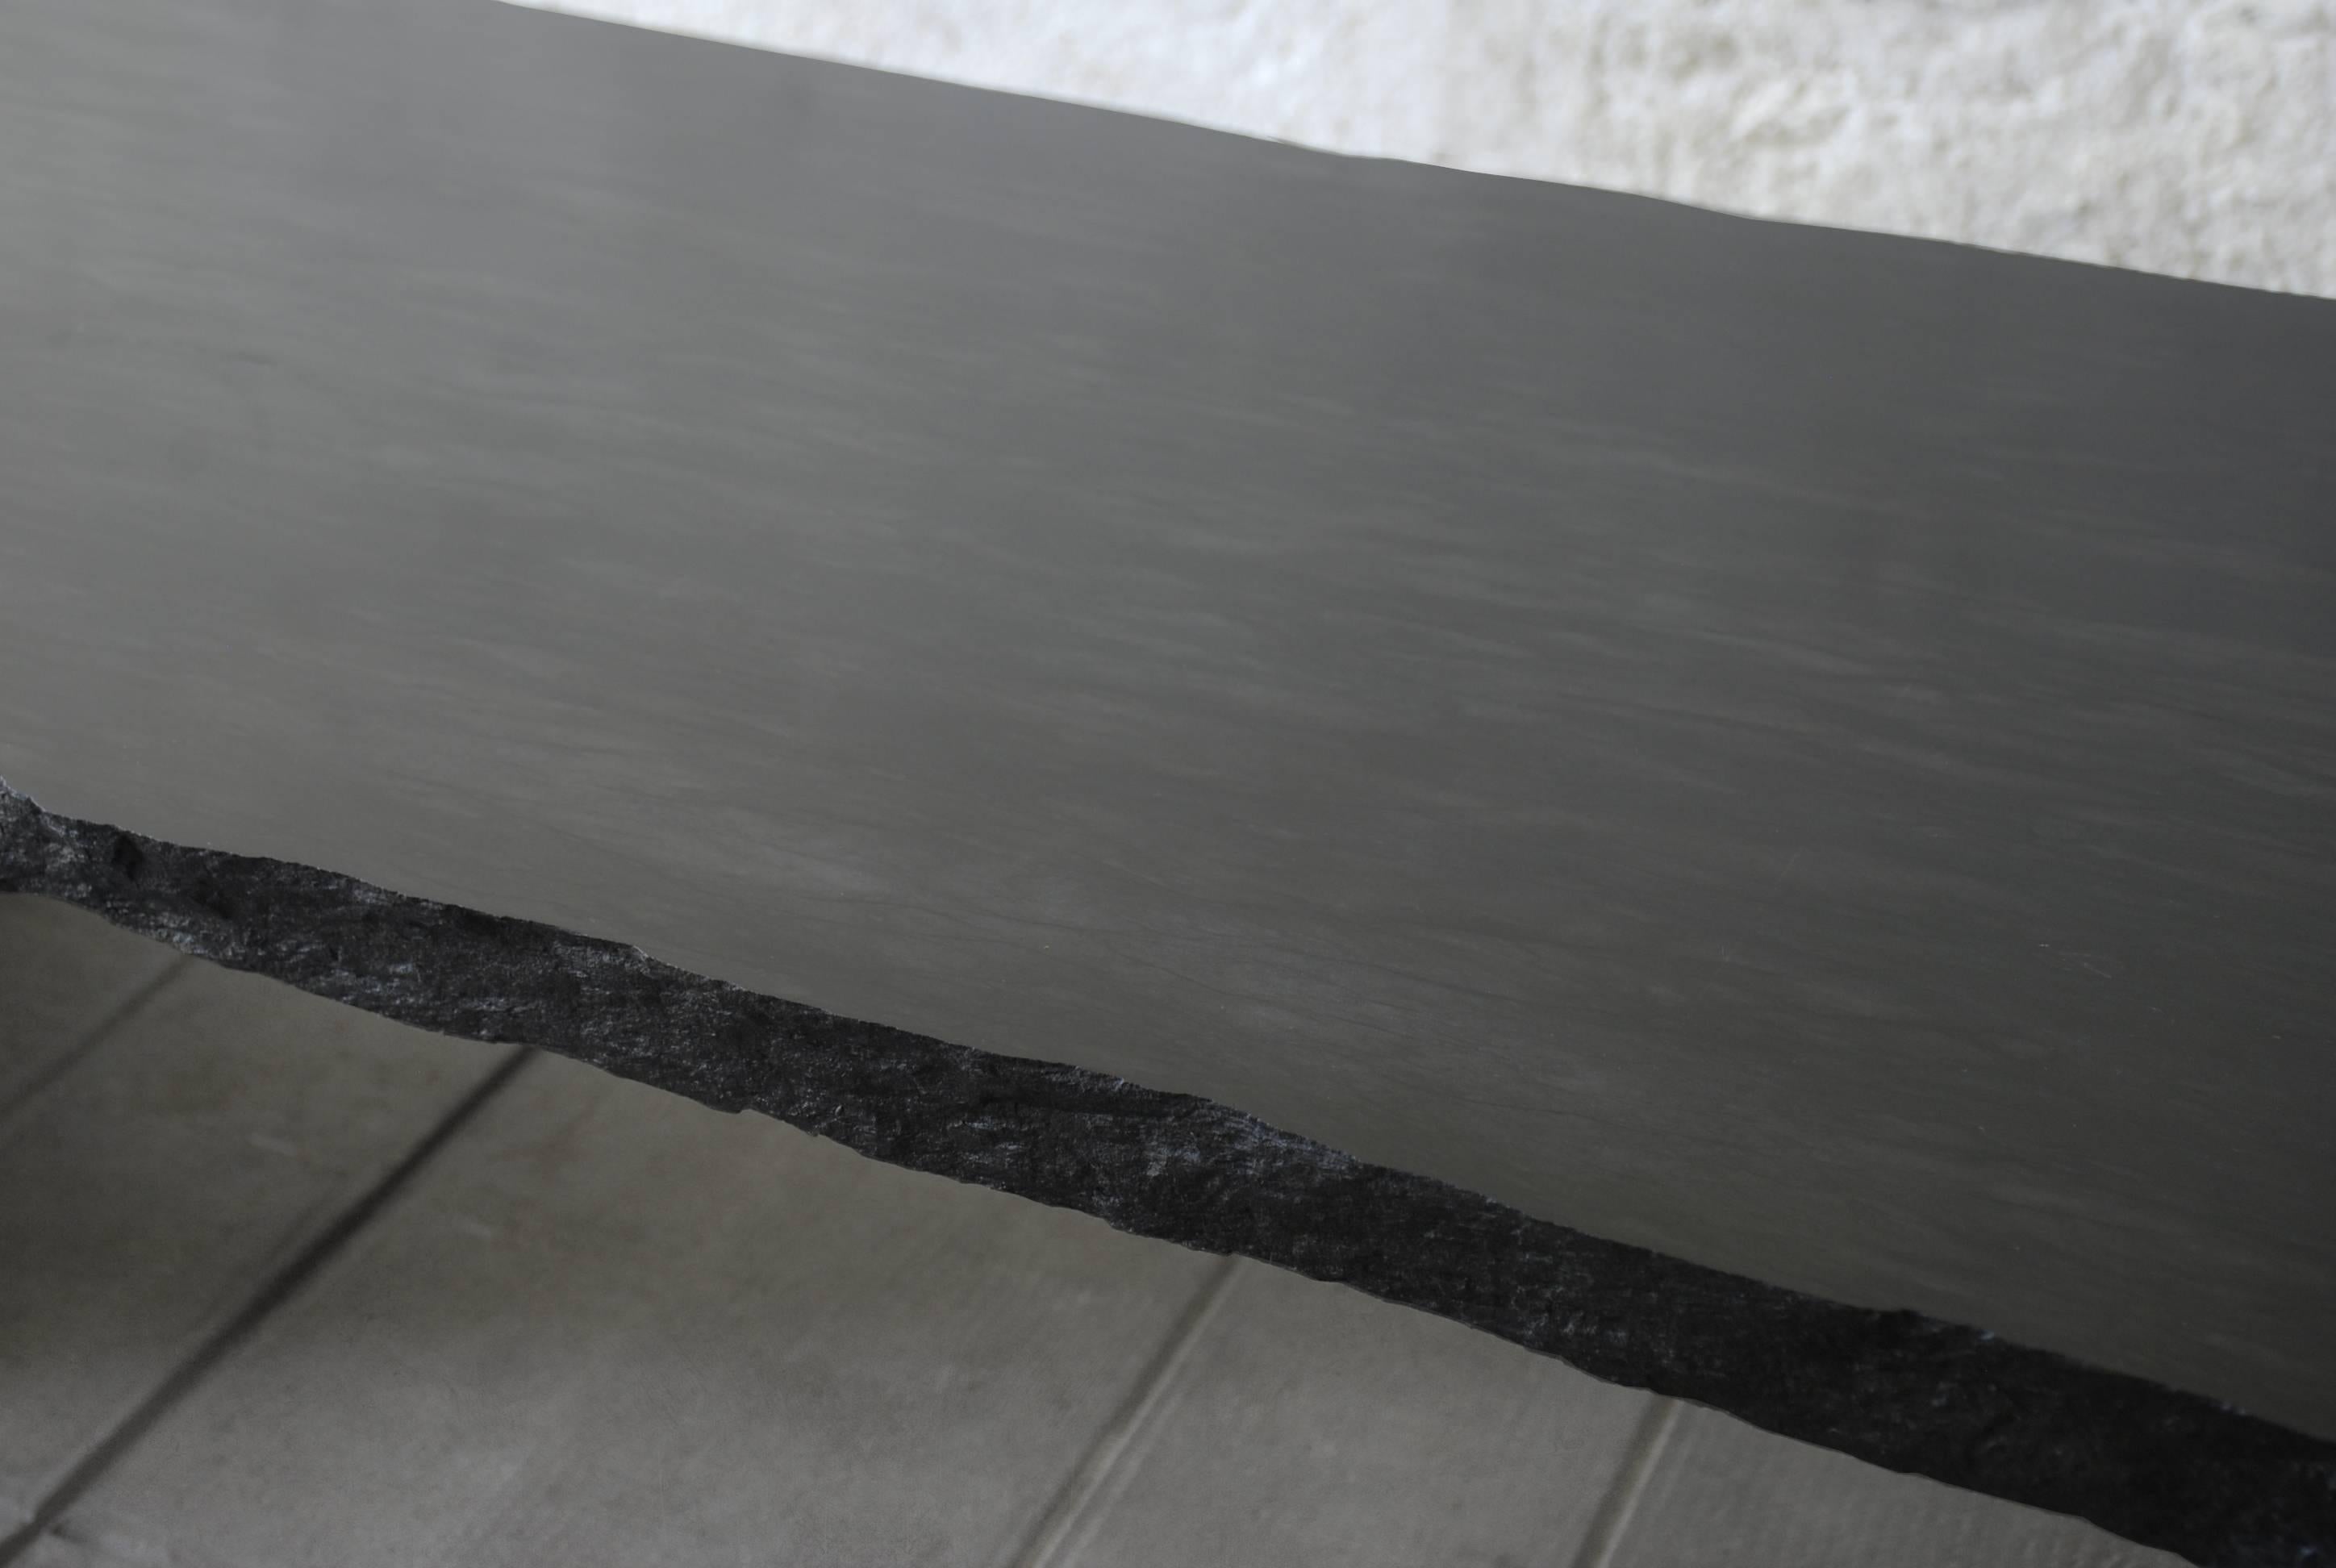 Sculpted marble slate coffee table, Fruste by Frederic Saulou
Designer: Fre´de´ric Saulou.
Materials: Tre´laze´ black slate
Dimensions: W 200 x D 38 x H 50 cm

Edition of 8.
Signed and Numbered.

“While wandering in the streets I have been